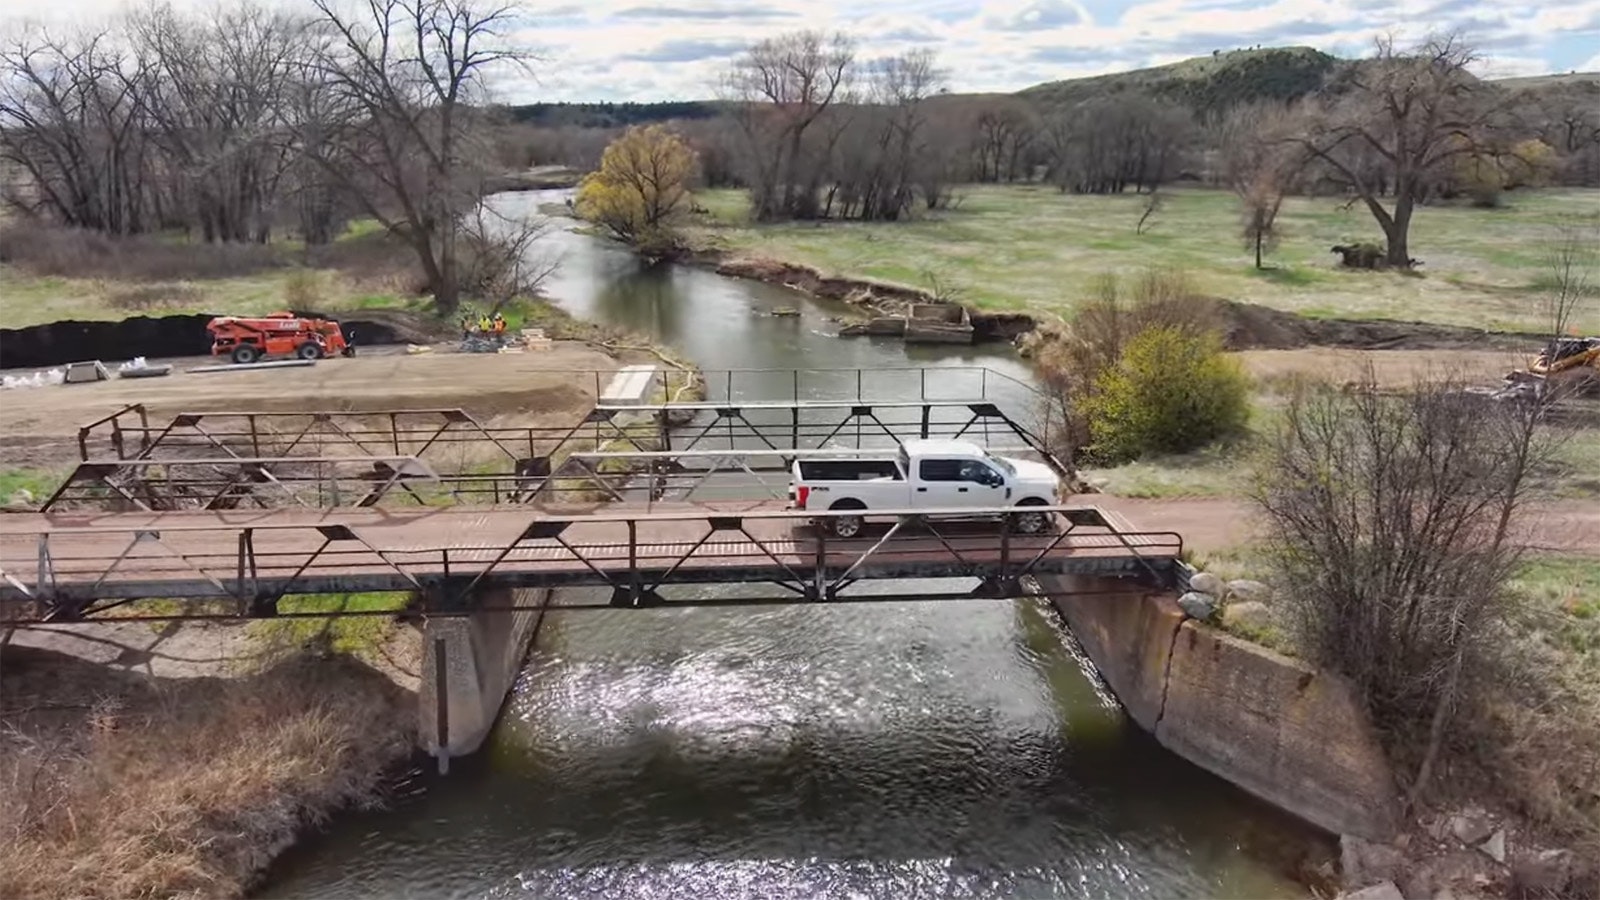 After 115 years, Wyoming's only remaining steel truss bridge, Monarch Bridge near Sheridan, has officially been retired.